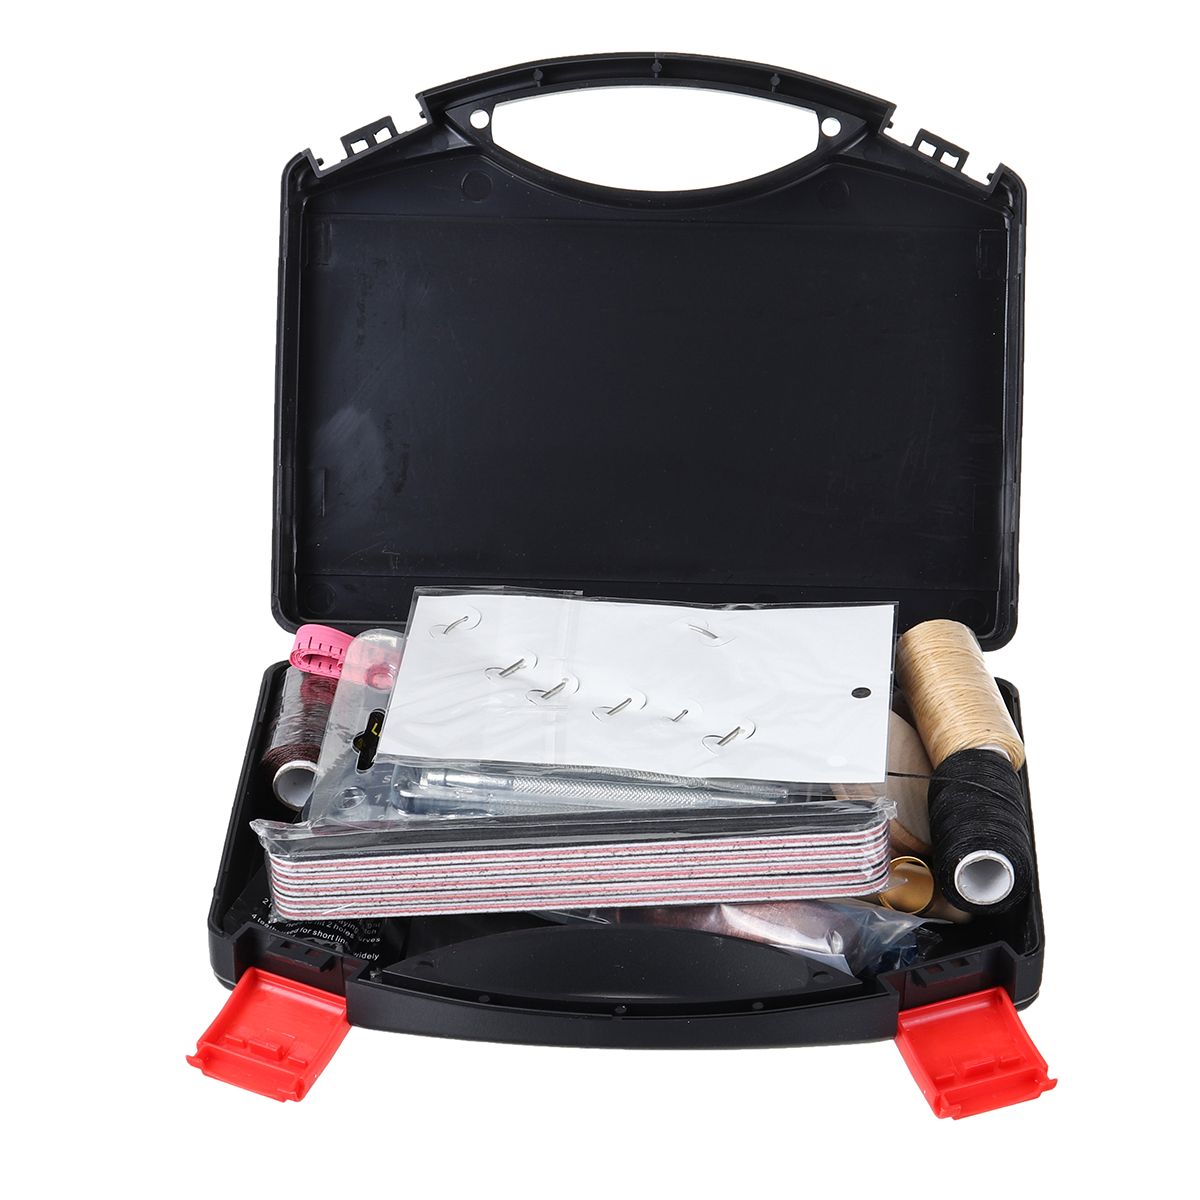 60Pcs-Professional-Leather-Craft-Tools-Kit-for-Hand-Sewing-Stitching-Working-Wheels-Stamping-Punch-T-1599985